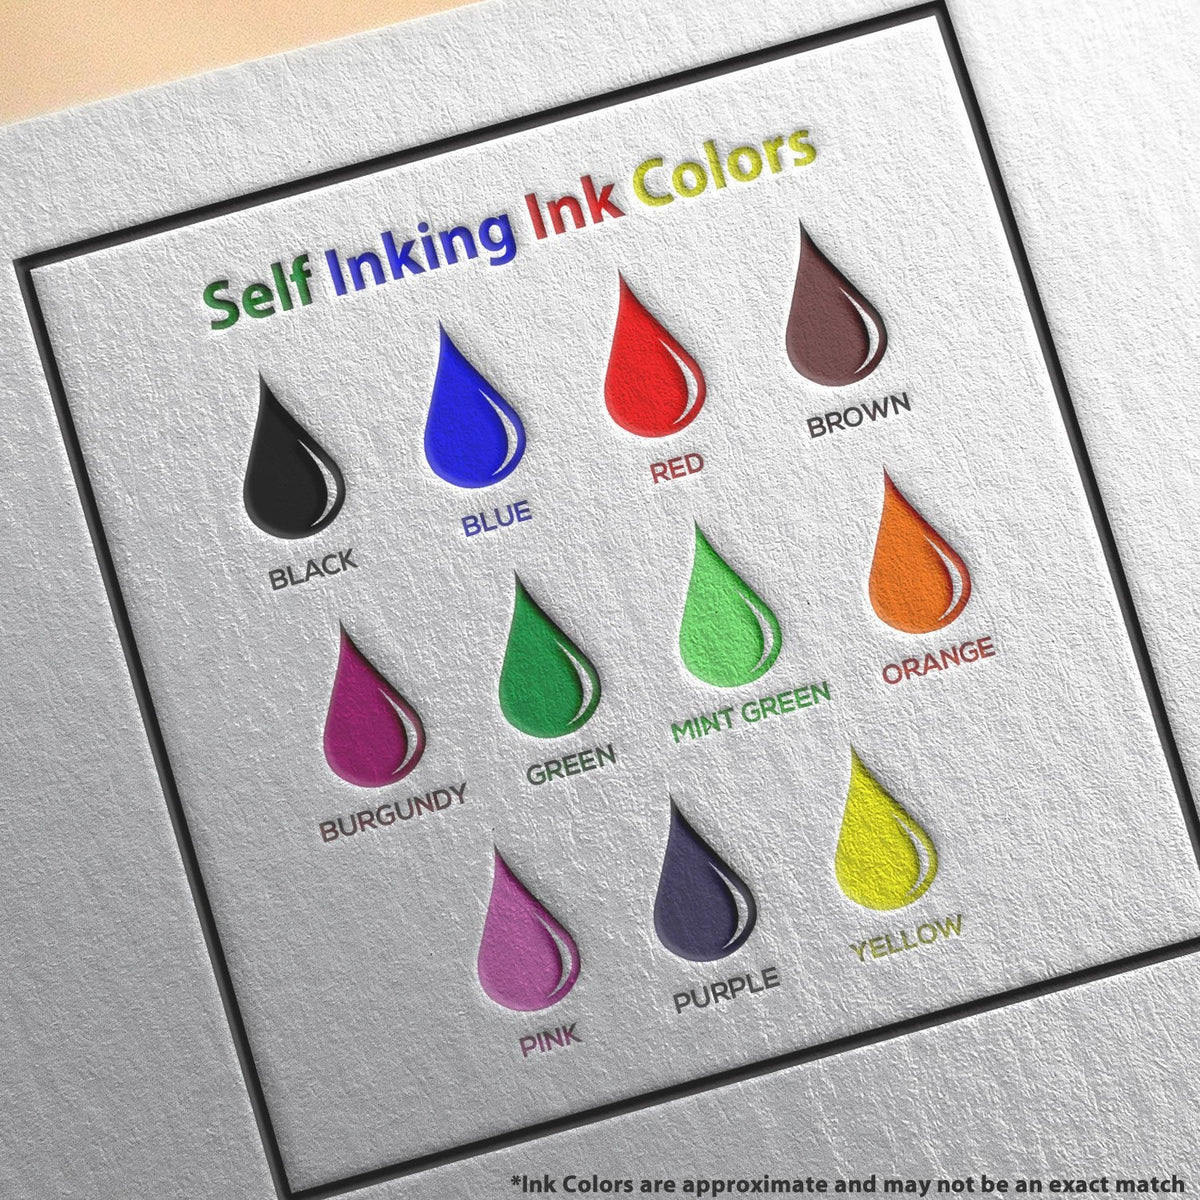 Self-Inking Please Pay Now No Statements Stamp Ink Color Options